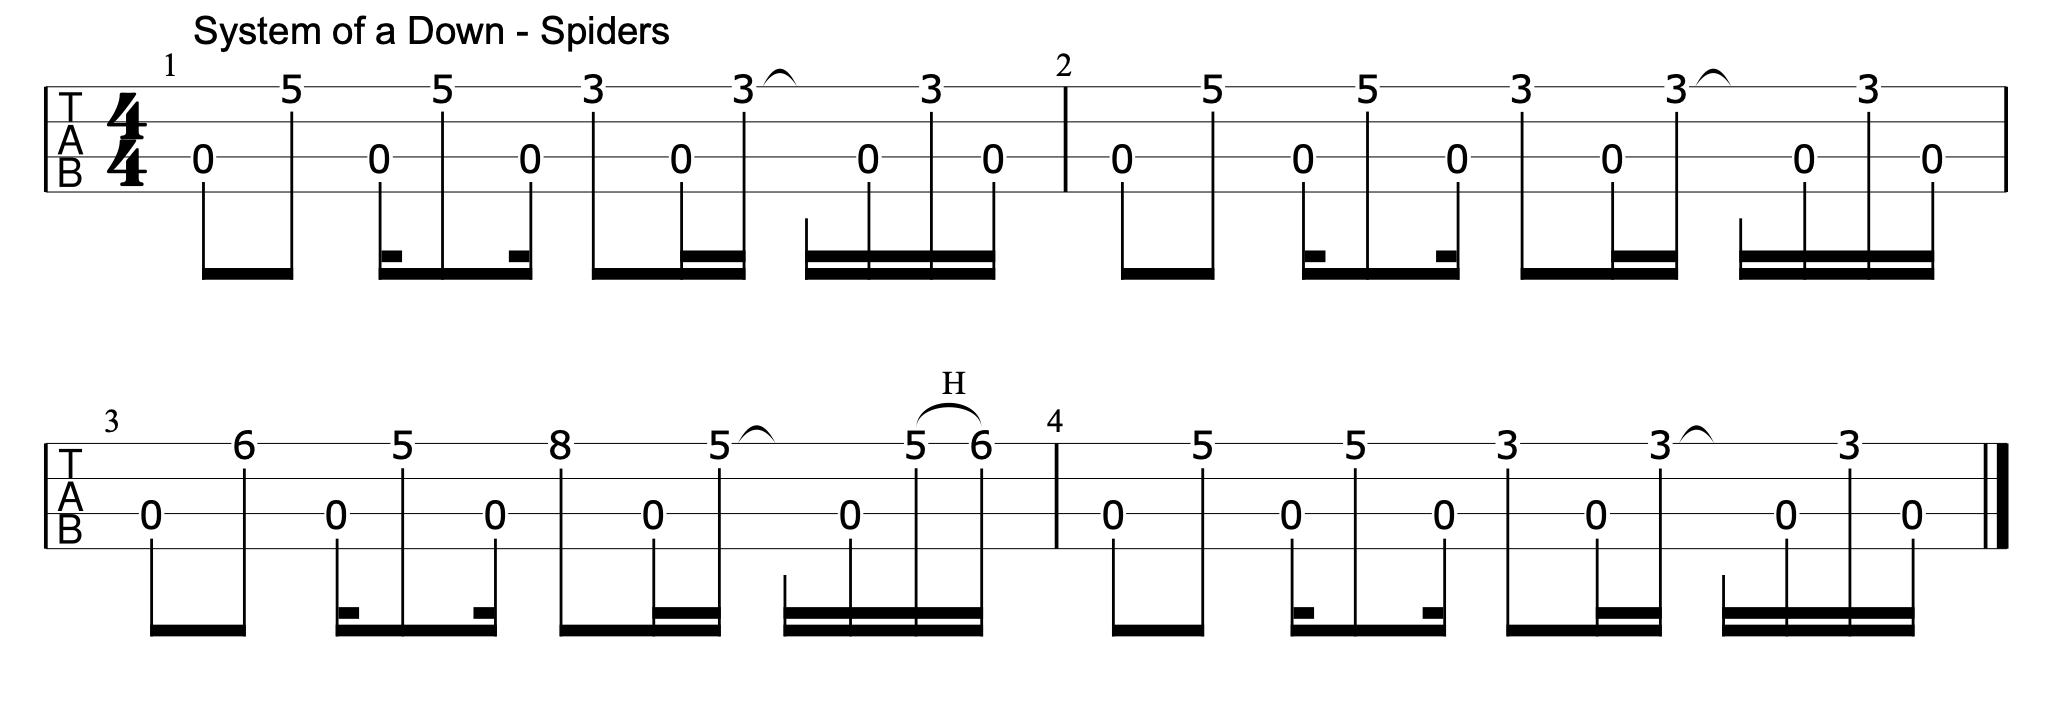 System of a Down - Spiders  Guitar Tab Playthrough 